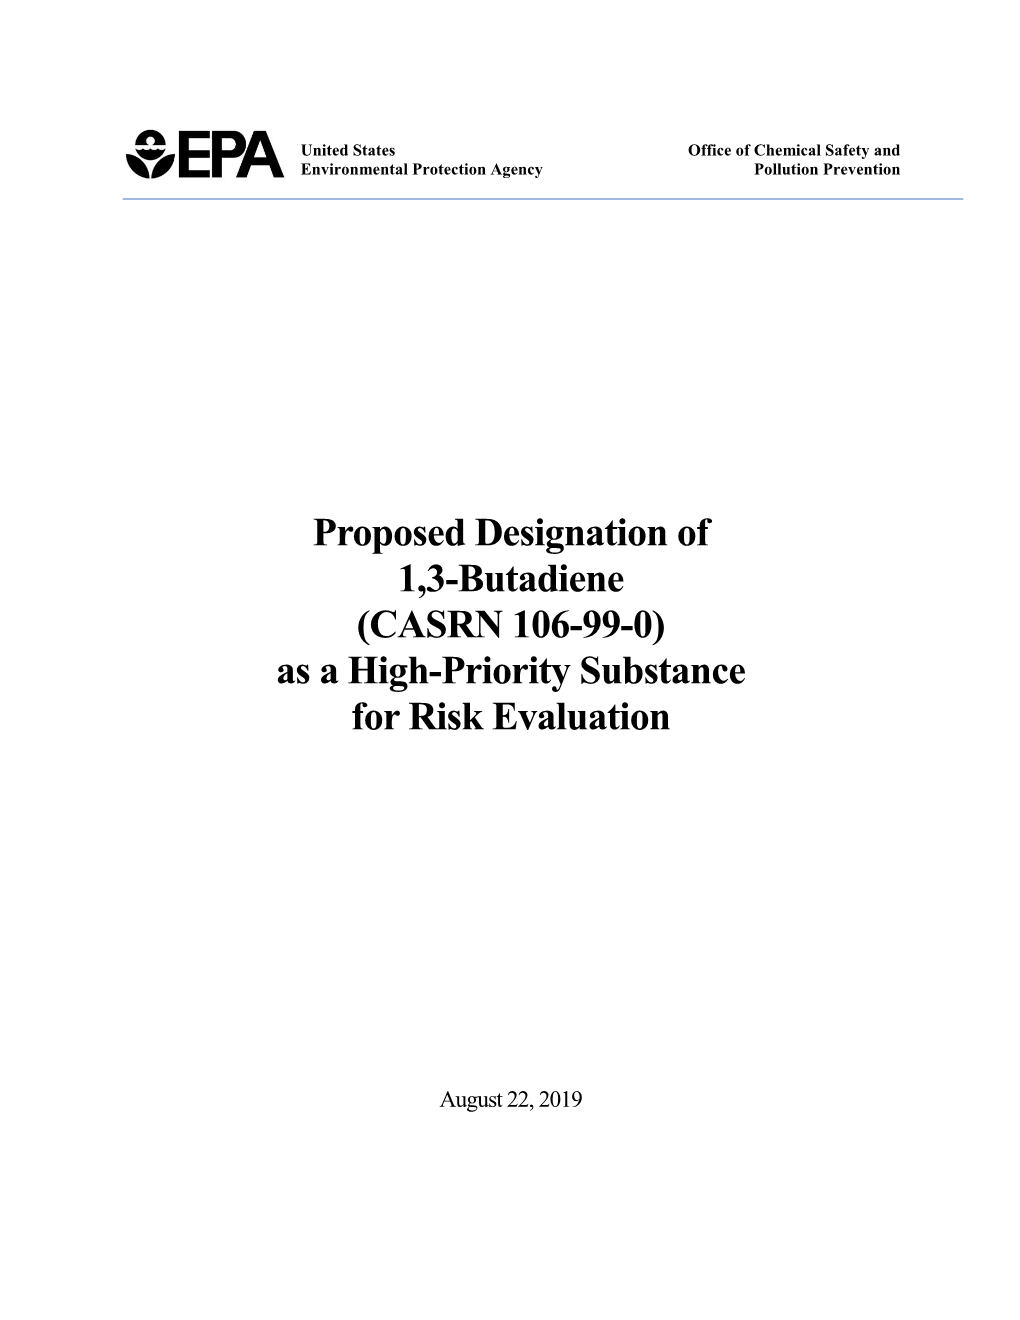 Proposed Designation of 1,3-Butadiene As a High Priority Substance for Risk Evaluation